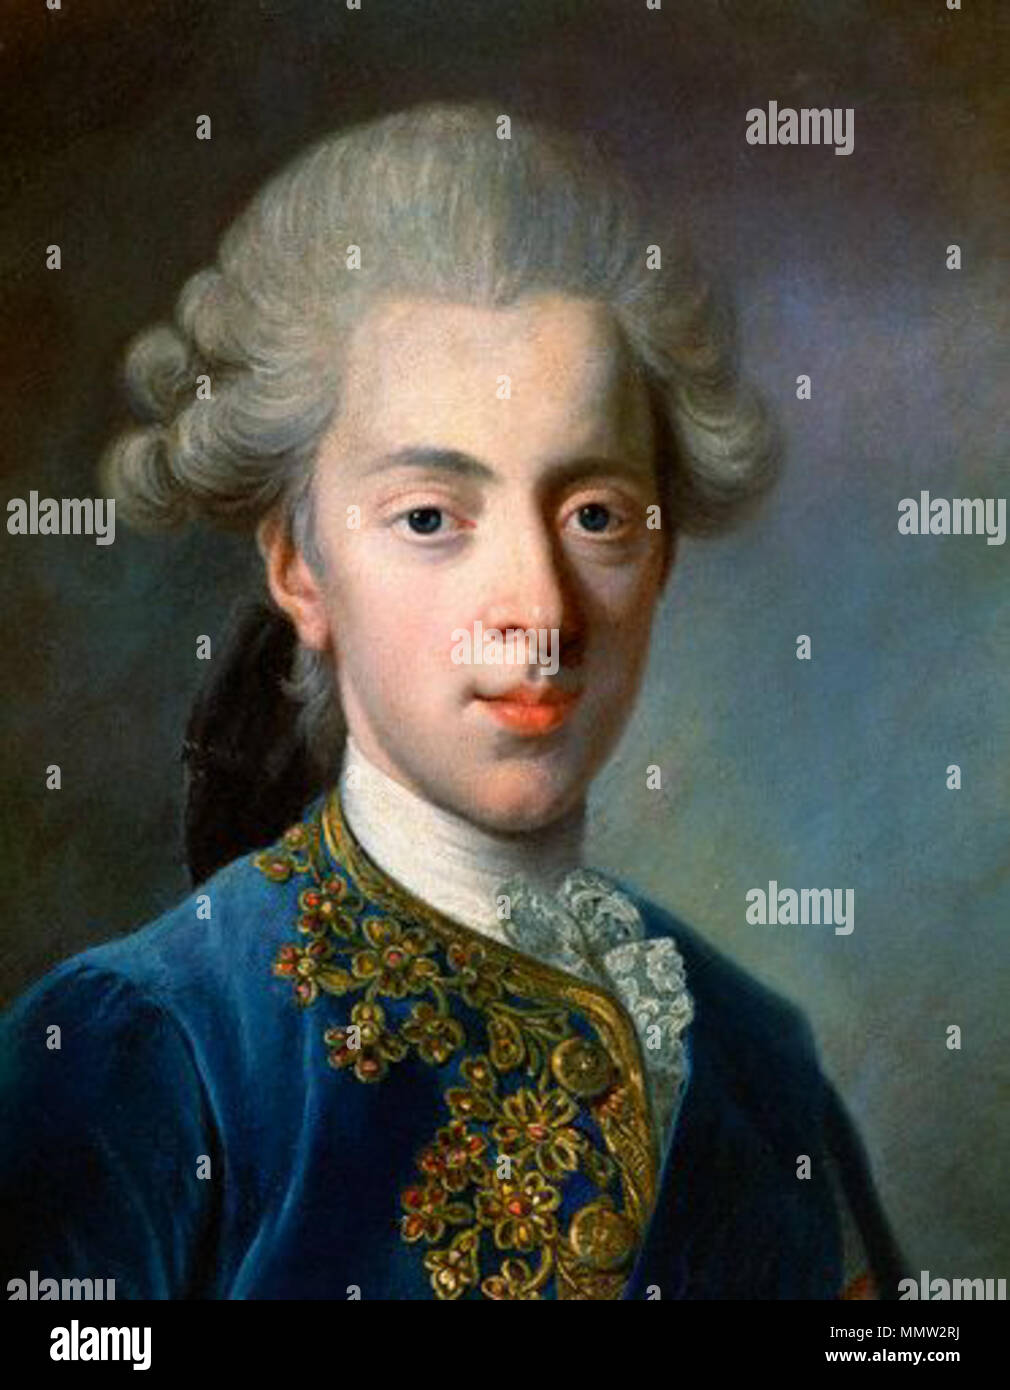 .  English: King Christian VII of Denmark (1749-1808)  . 18th century. Christian7ofdenmarknorway Stock Photo